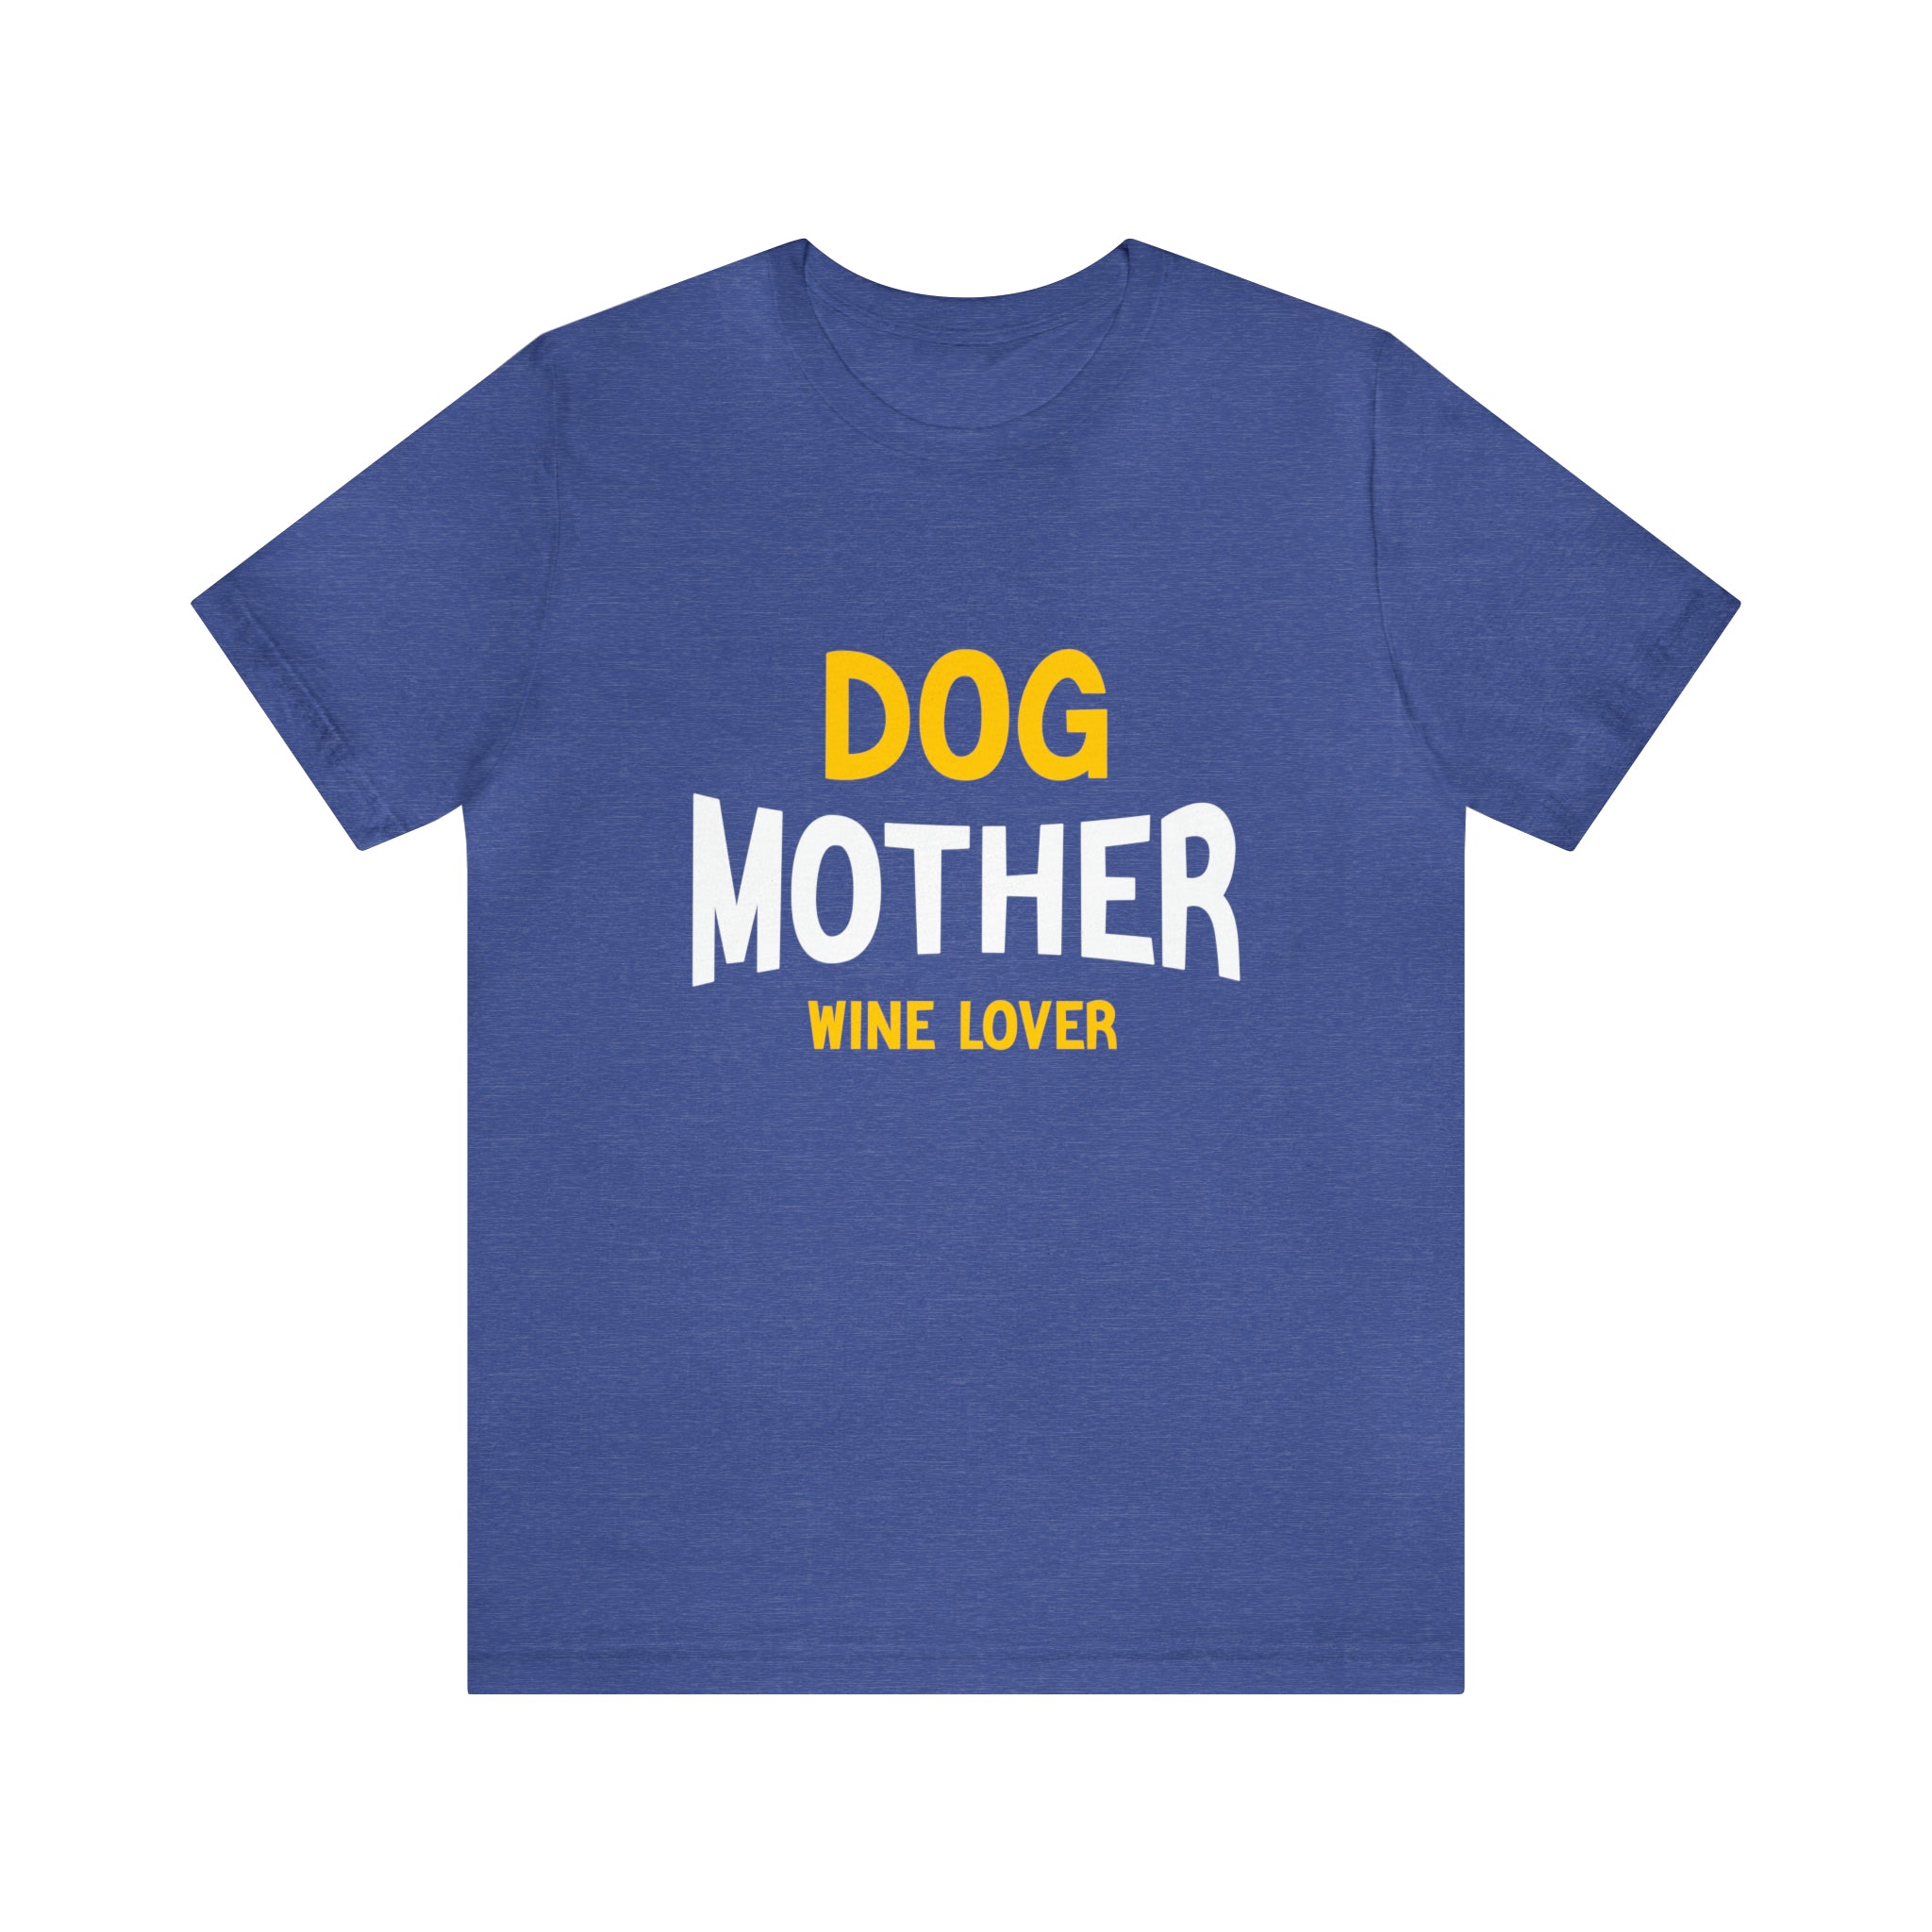 This Dog Mother Wine Lover T-Shirt is perfect for the dog mother who also happens to be a wine lover.